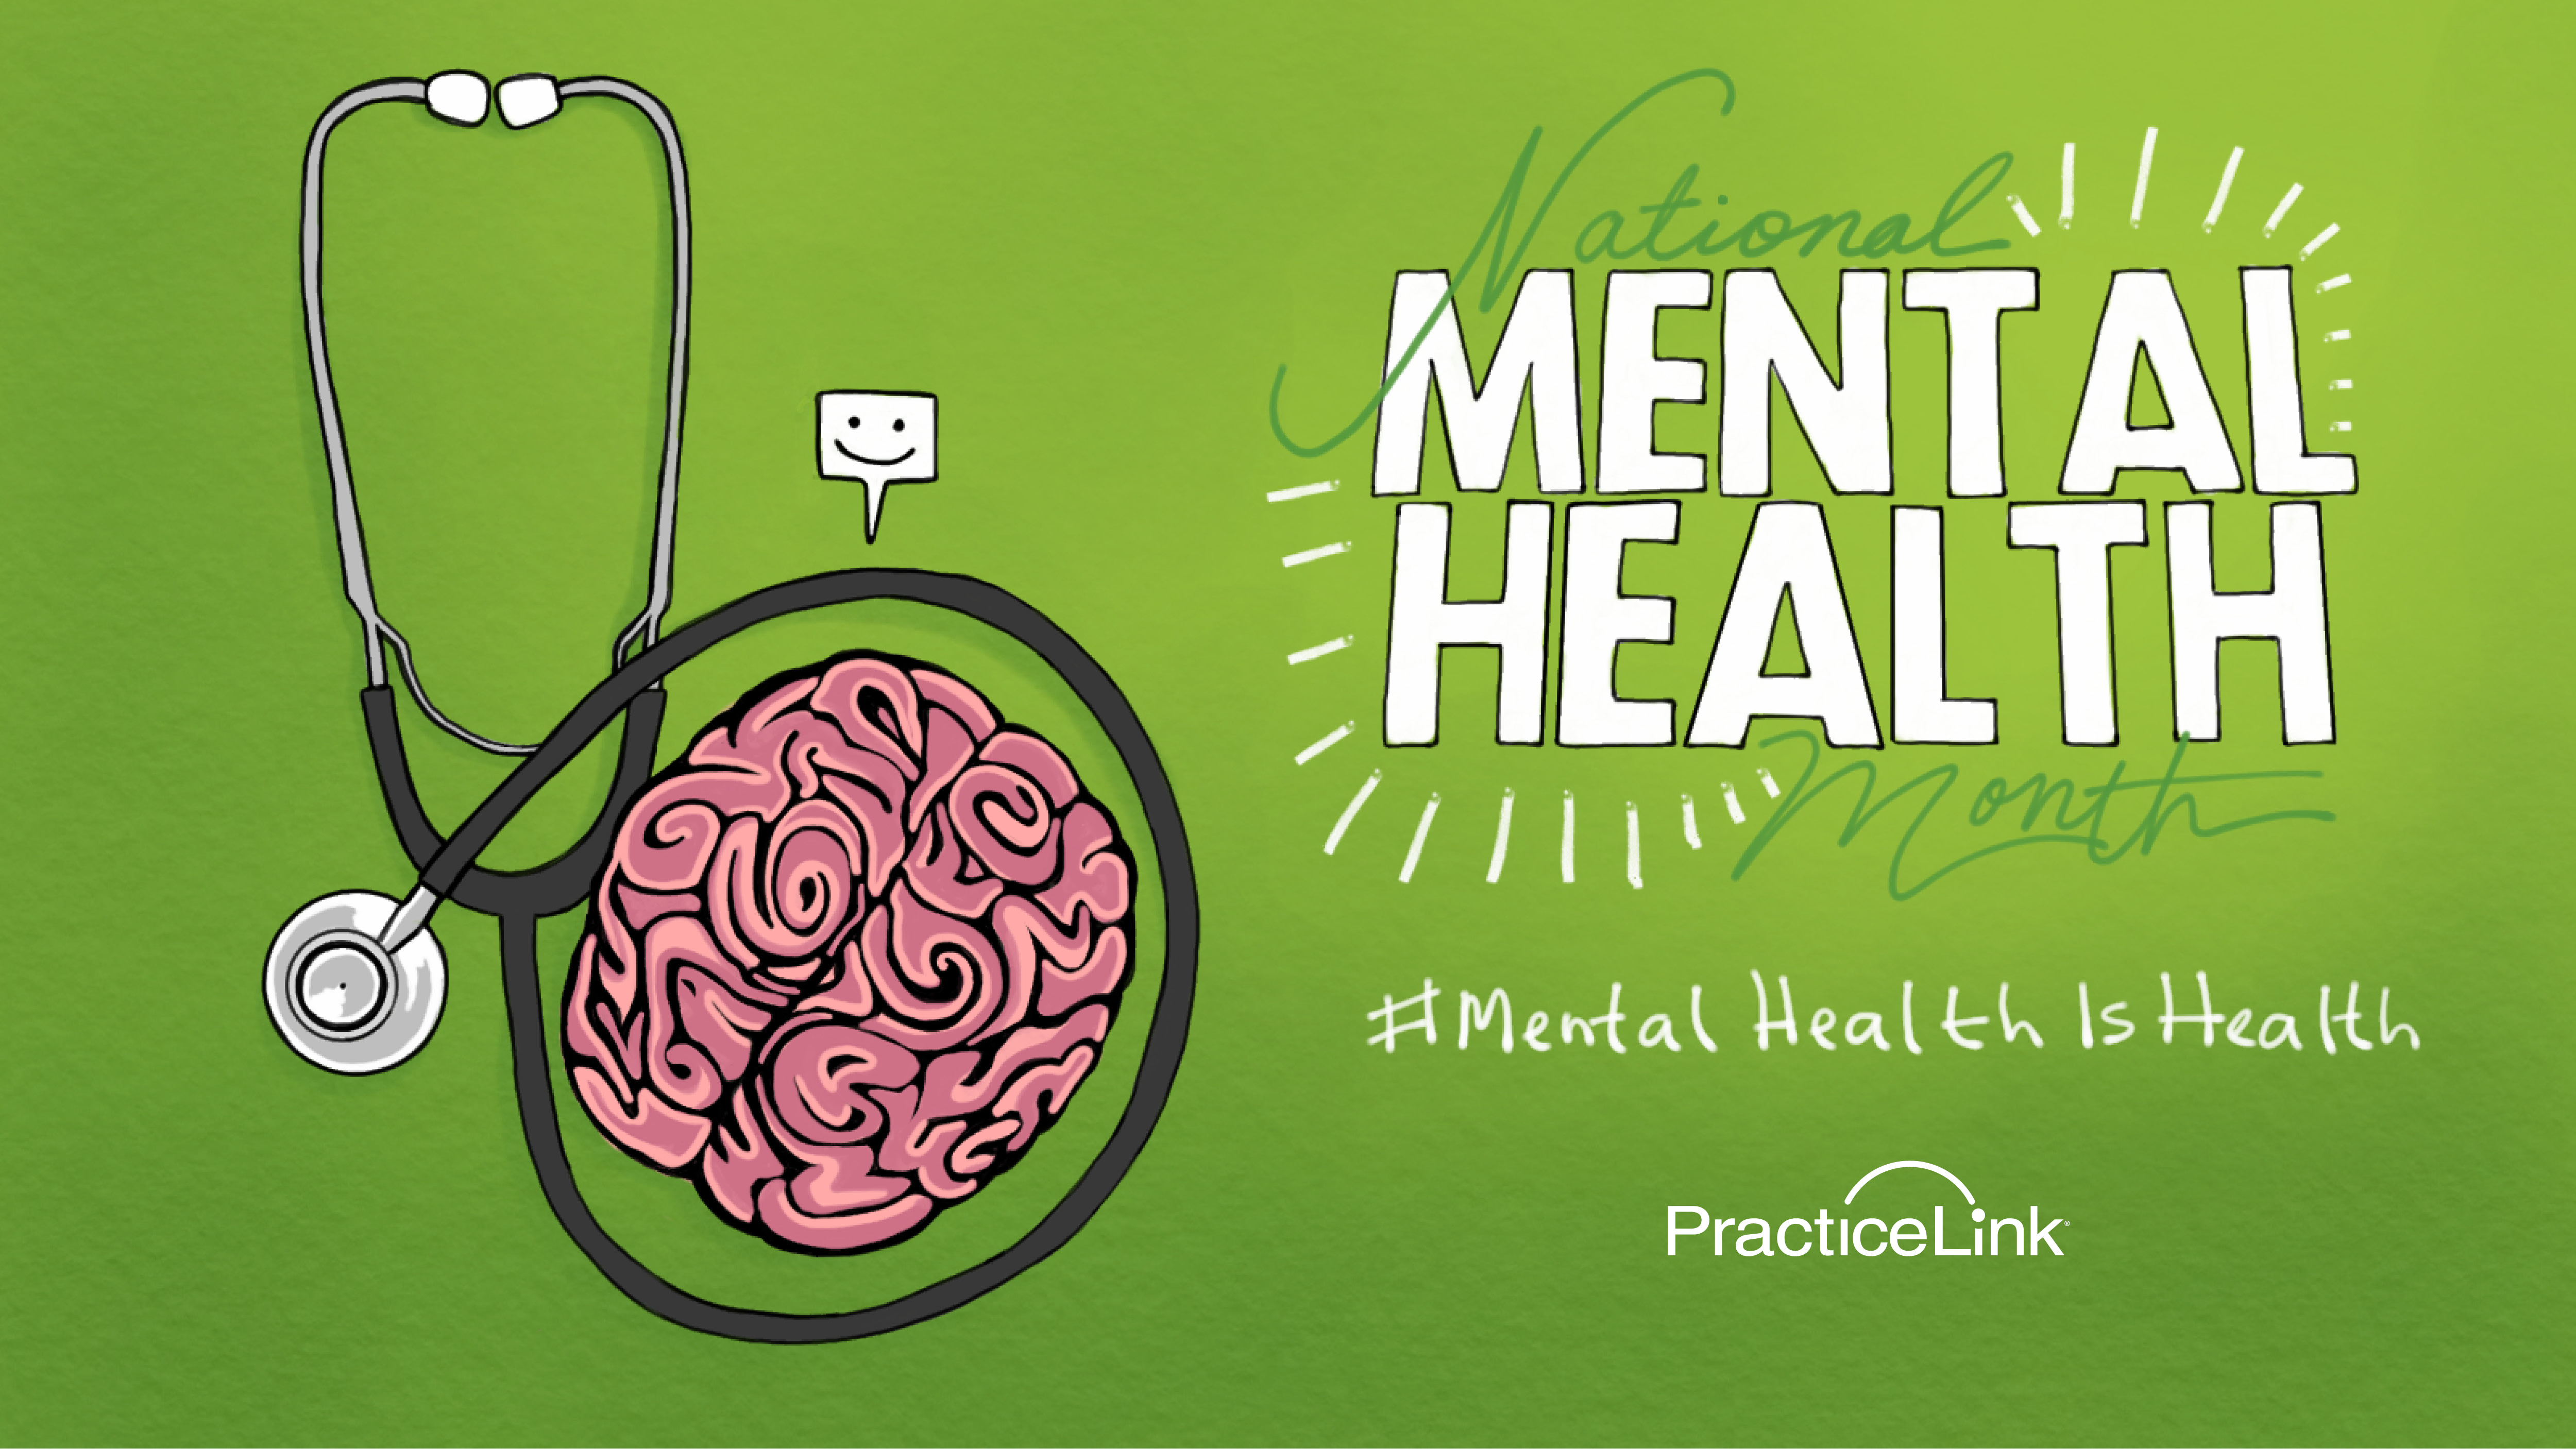 A new perspective on National Mental Health Month